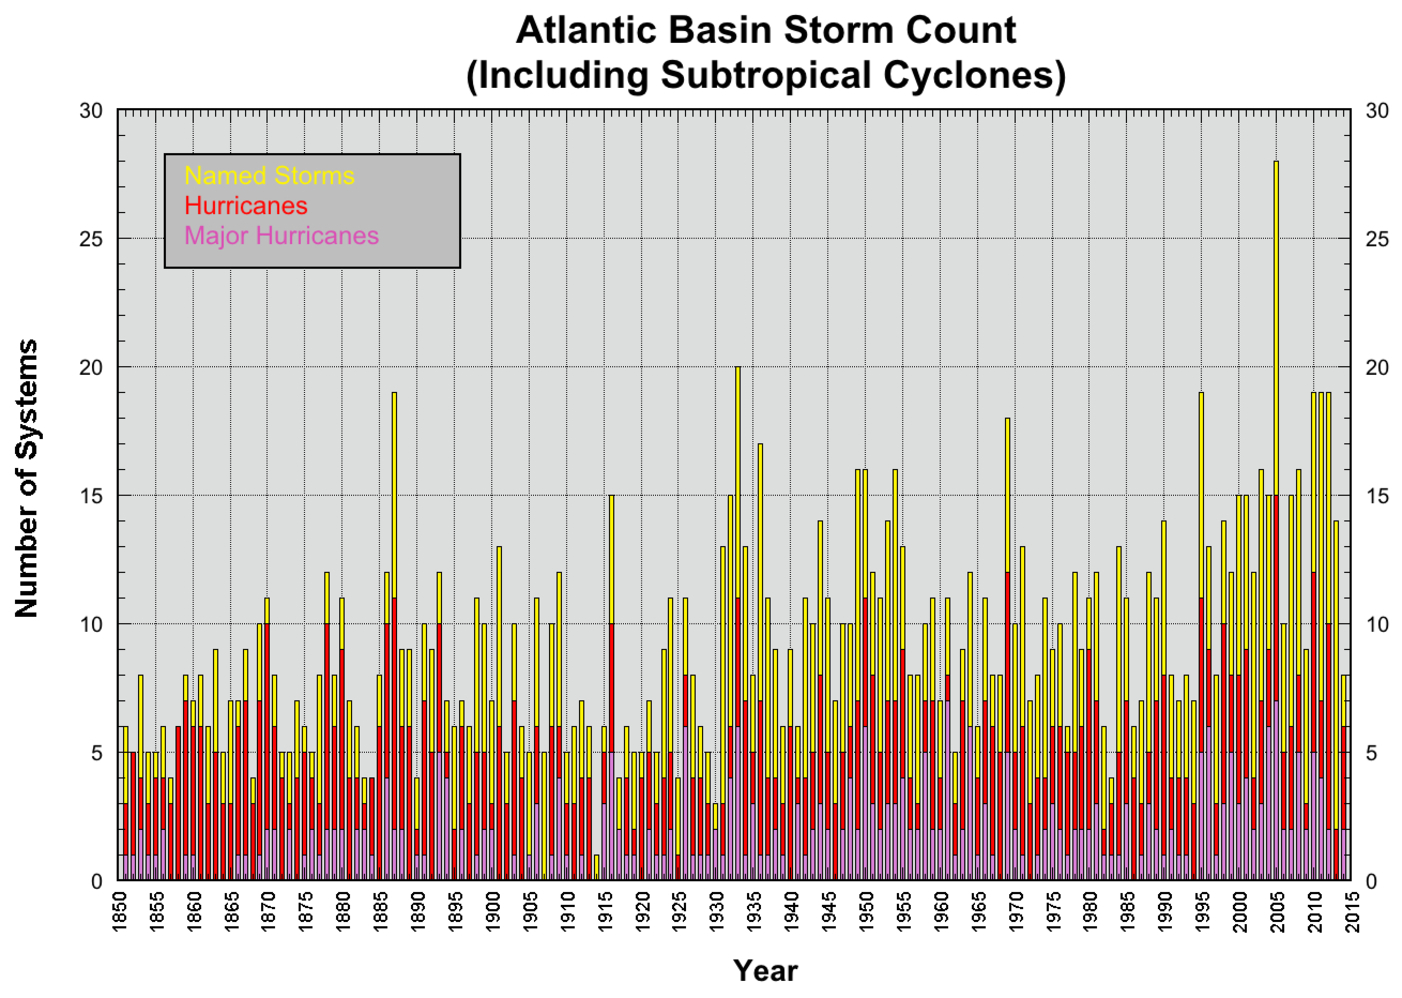 There is a trend towards more tropical storms and hurricanes in the North Atlantic